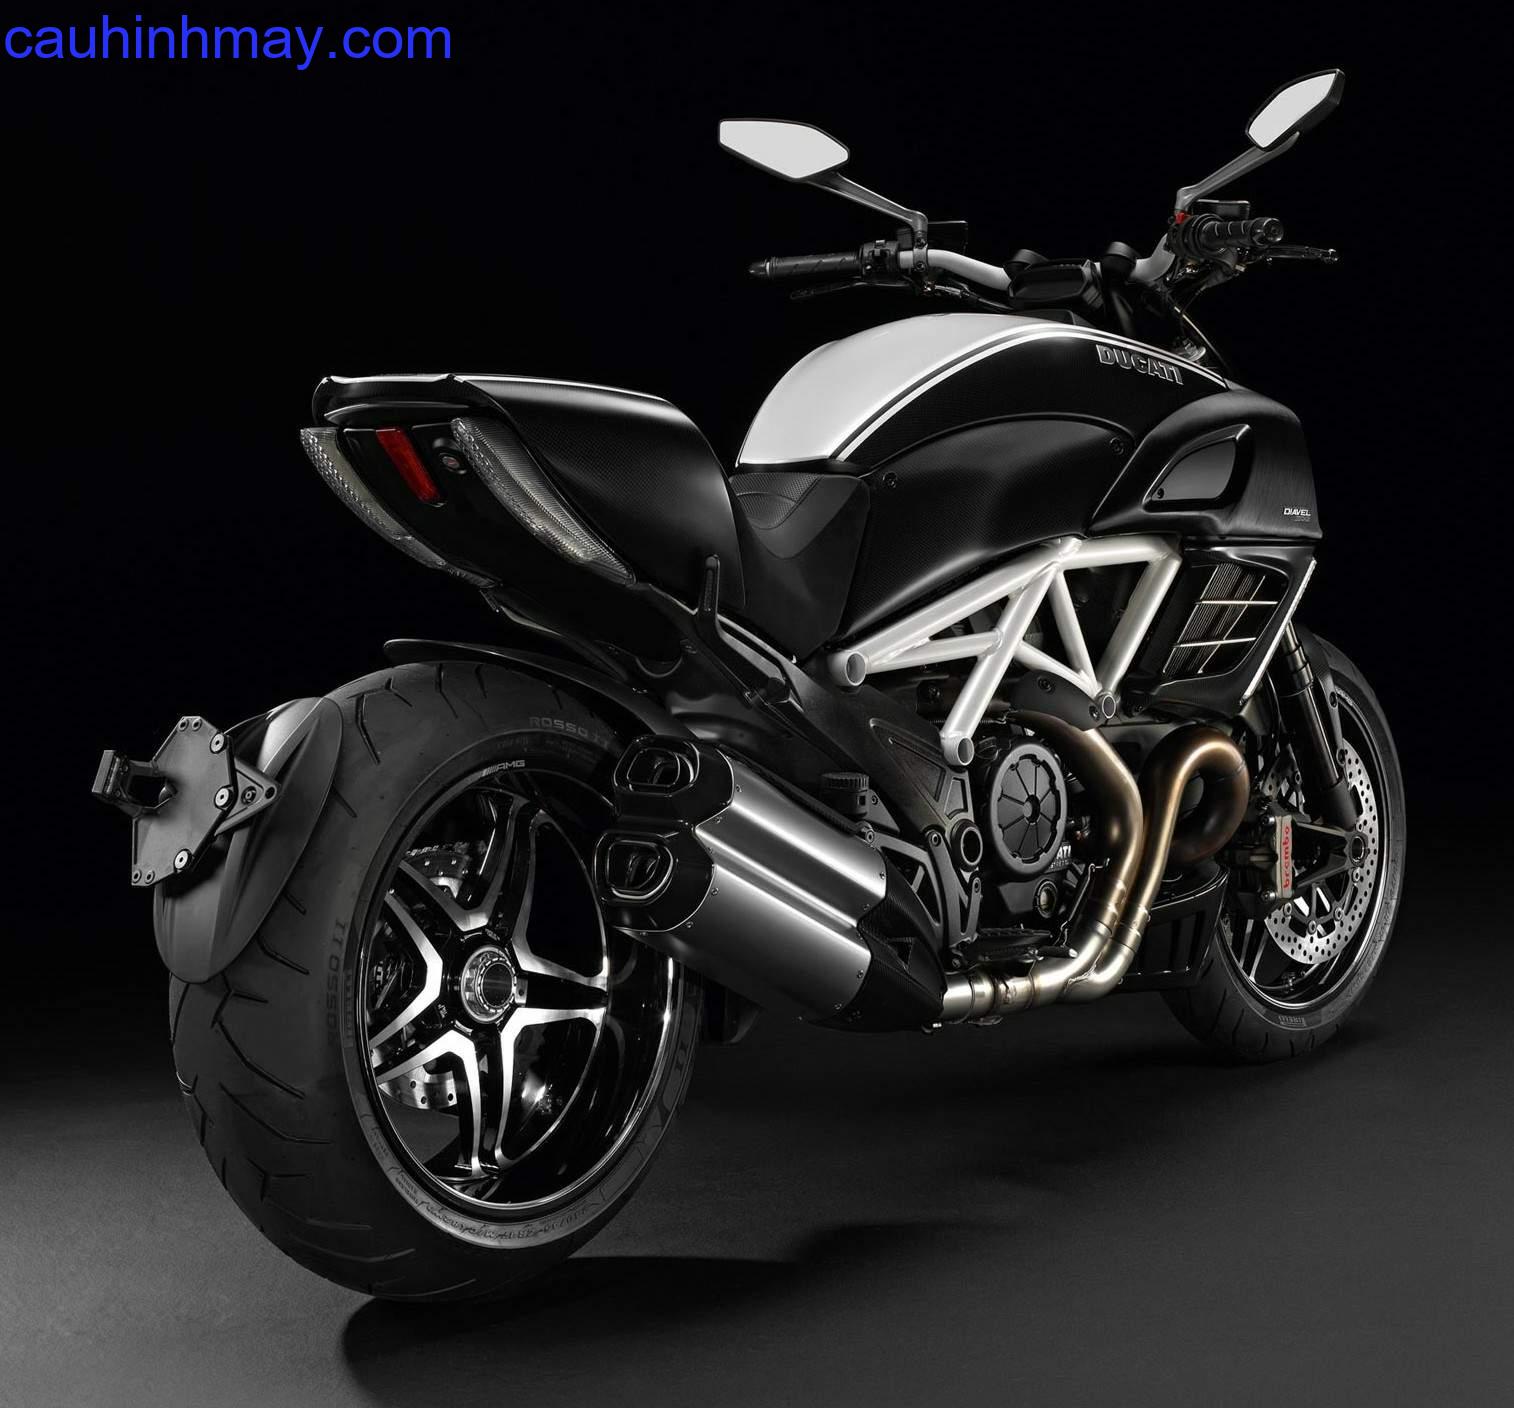 DUCATI DIAVEL AMG SPECIAL EDITION